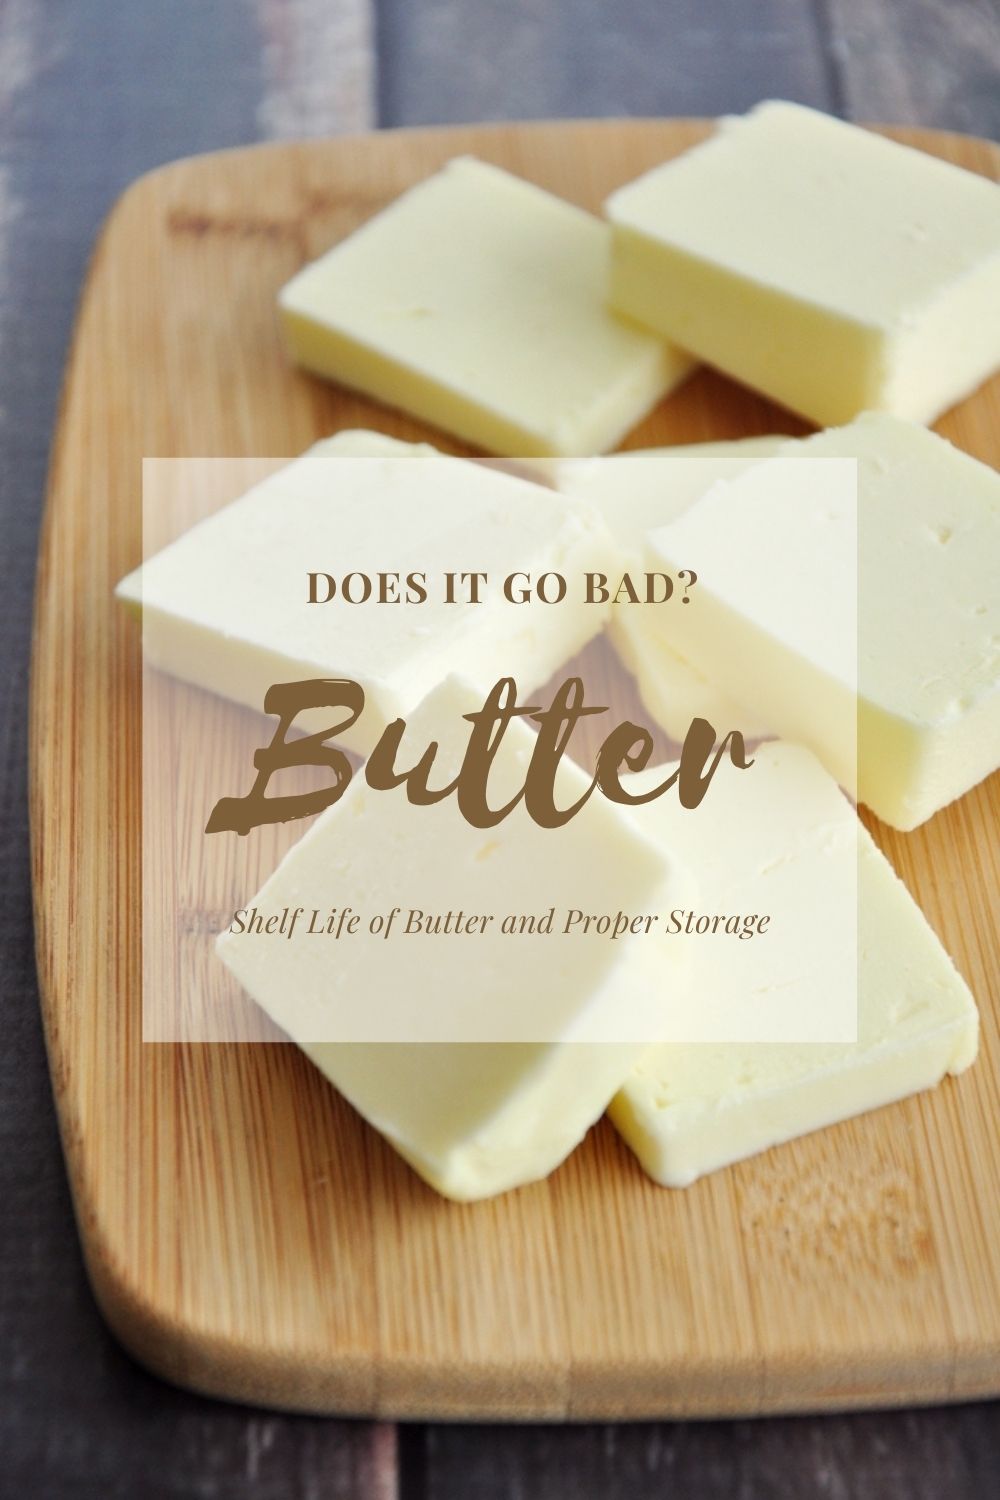 Does Butter Go Bad? Shelf Life of Butter and Proper Storage